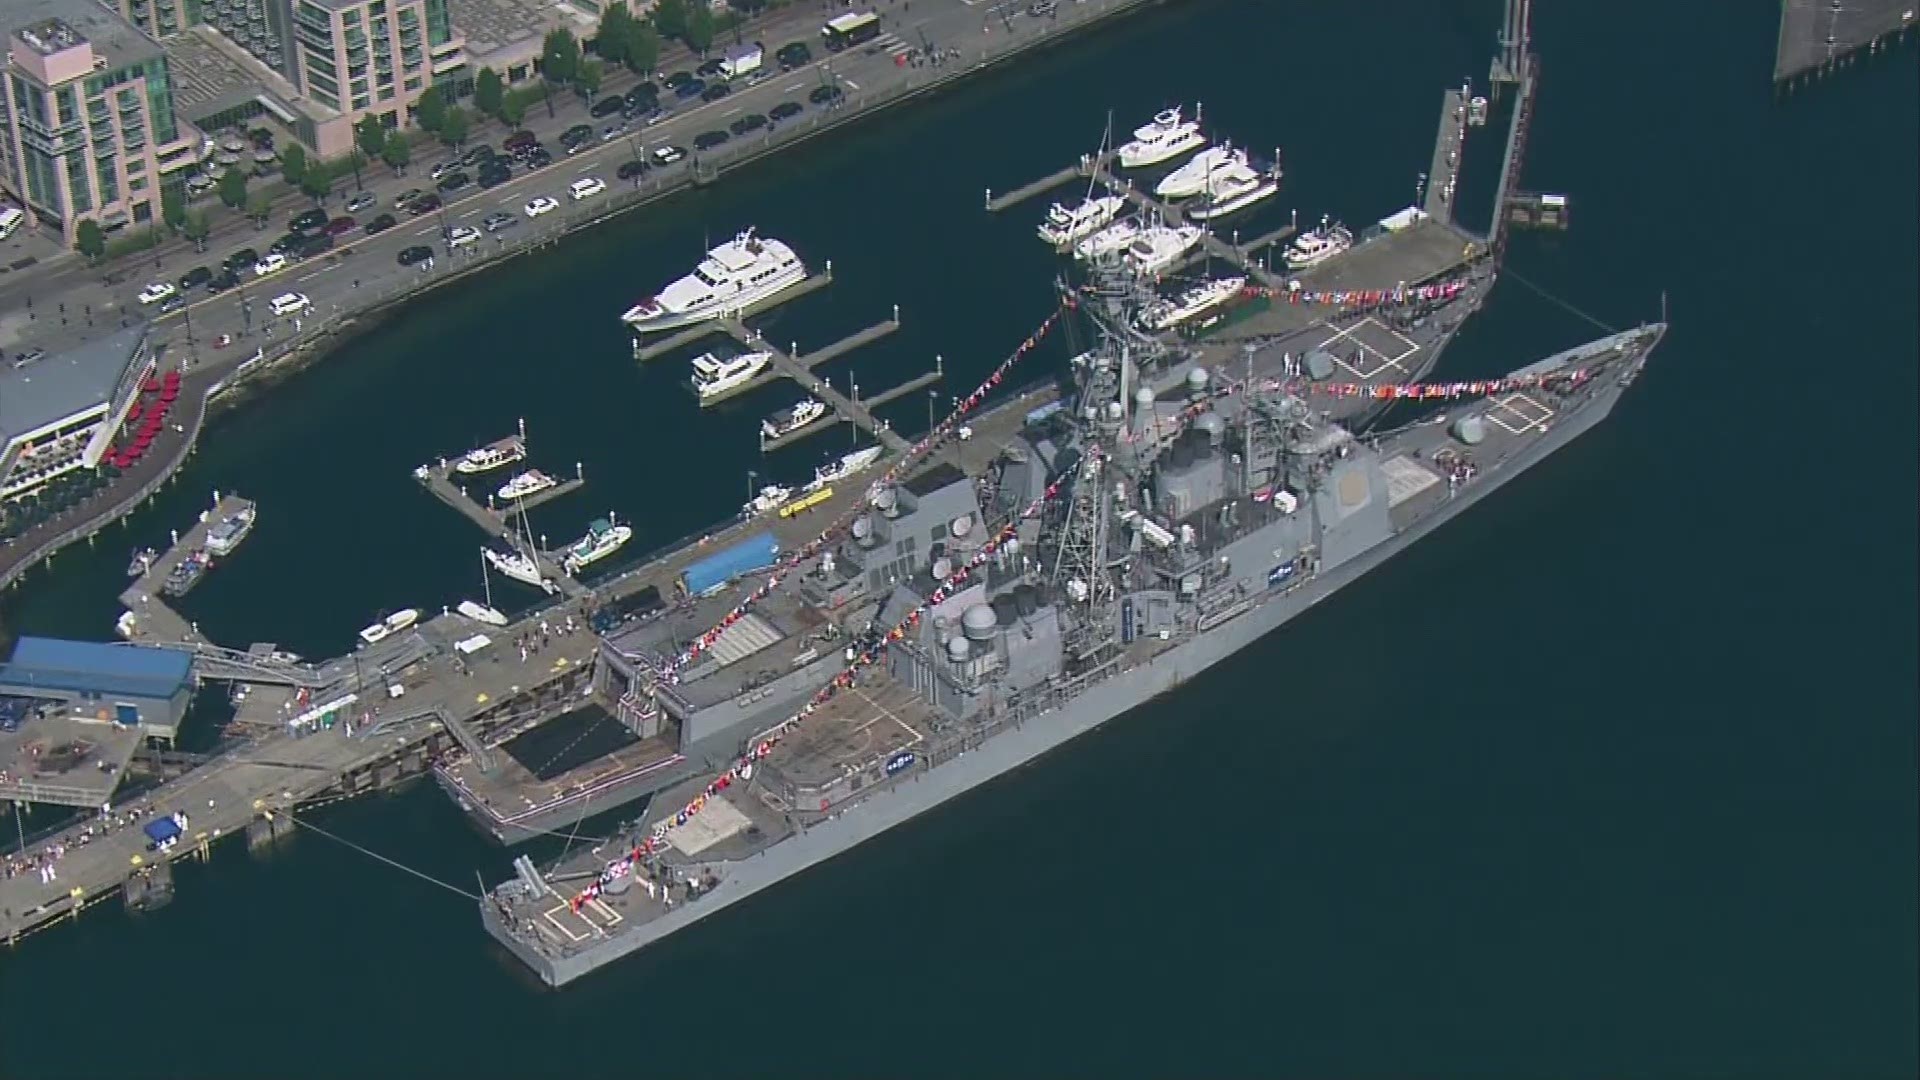 Several US Navy ships are docked in Puget Sound this week for Fleet Week, part of the 70th annual Seafair festivities in Seattle. SkyKING flew overhead the Seattle waterfront on Wednesday.